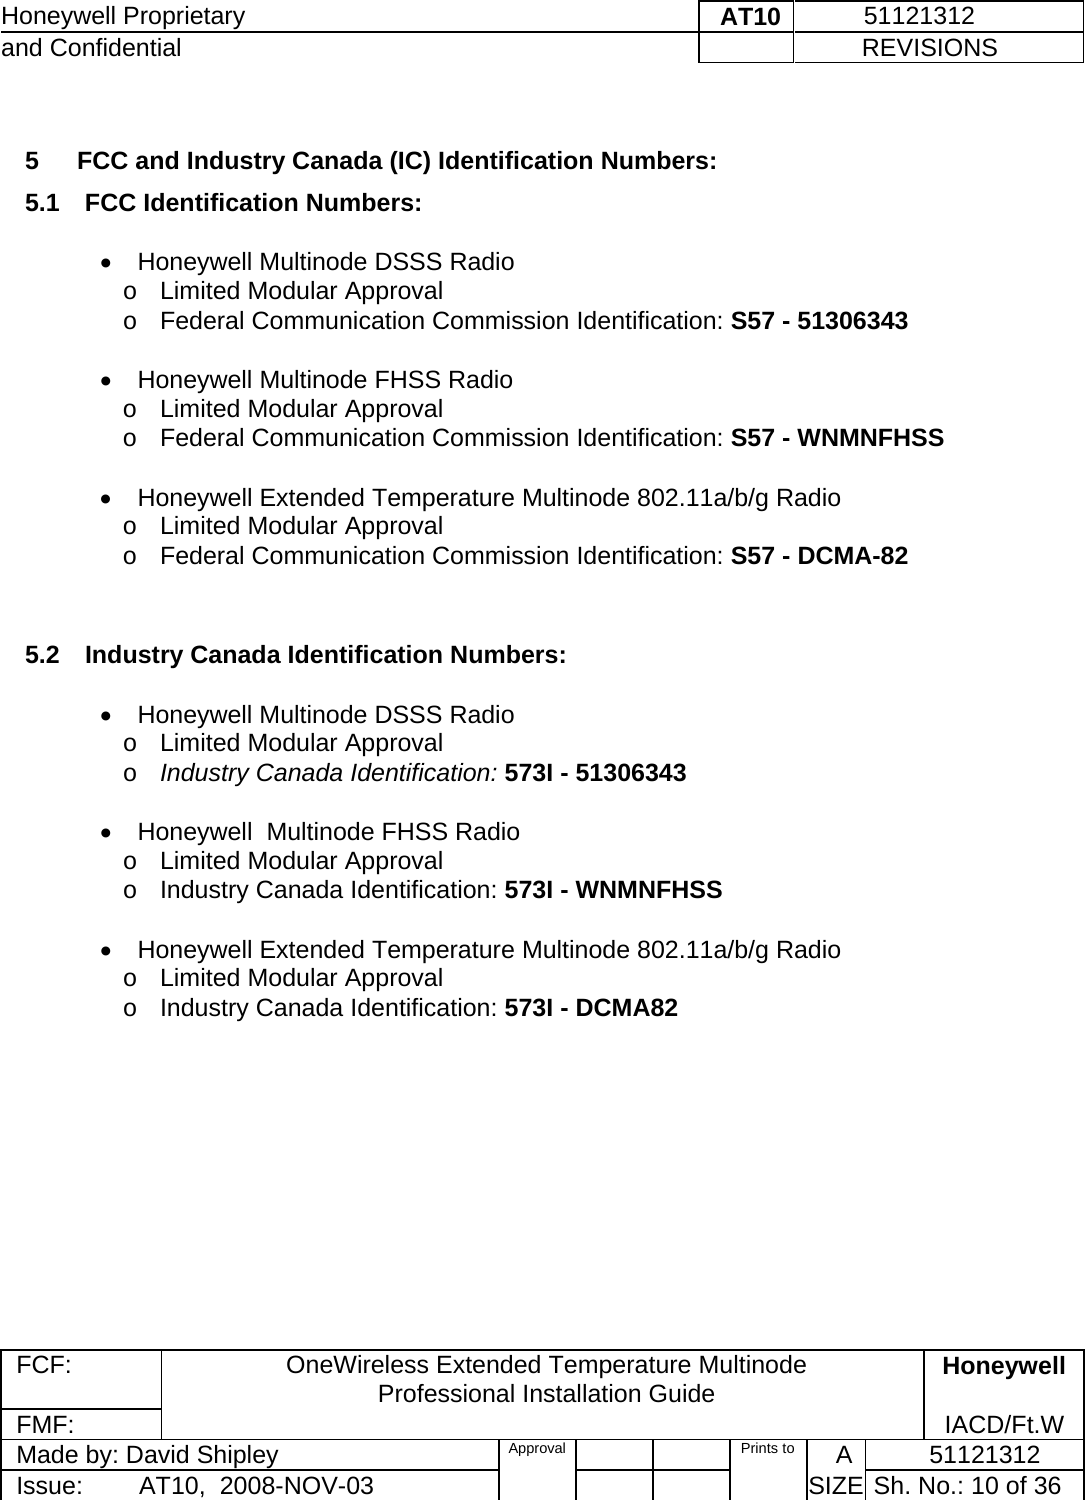 Honeywell Proprietary    AT10           51121312 and Confidential             REVISIONS  FCF: OneWireless Extended Temperature Multinode  Professional Installation Guide  Honeywell FMF:               IACD/Ft.W Made by: David Shipley  Approval   Prints to     A           51121312 Issue:        AT10,  2008-NOV-03          SIZE  Sh. No.: 10 of 36   5   FCC and Industry Canada (IC) Identification Numbers:  5.1  FCC Identification Numbers:   •  Honeywell Multinode DSSS Radio  o  Limited Modular Approval    o  Federal Communication Commission Identification: S57 - 51306343    •  Honeywell Multinode FHSS Radio  o  Limited Modular Approval    o  Federal Communication Commission Identification: S57 - WNMNFHSS   •  Honeywell Extended Temperature Multinode 802.11a/b/g Radio  o  Limited Modular Approval    o  Federal Communication Commission Identification: S57 - DCMA-82   5.2  Industry Canada Identification Numbers:   •  Honeywell Multinode DSSS Radio  o  Limited Modular Approval    o Industry Canada Identification: 573I - 51306343   •  Honeywell  Multinode FHSS Radio  o  Limited Modular Approval    o  Industry Canada Identification: 573I - WNMNFHSS   •  Honeywell Extended Temperature Multinode 802.11a/b/g Radio  o  Limited Modular Approval    o  Industry Canada Identification: 573I - DCMA82    